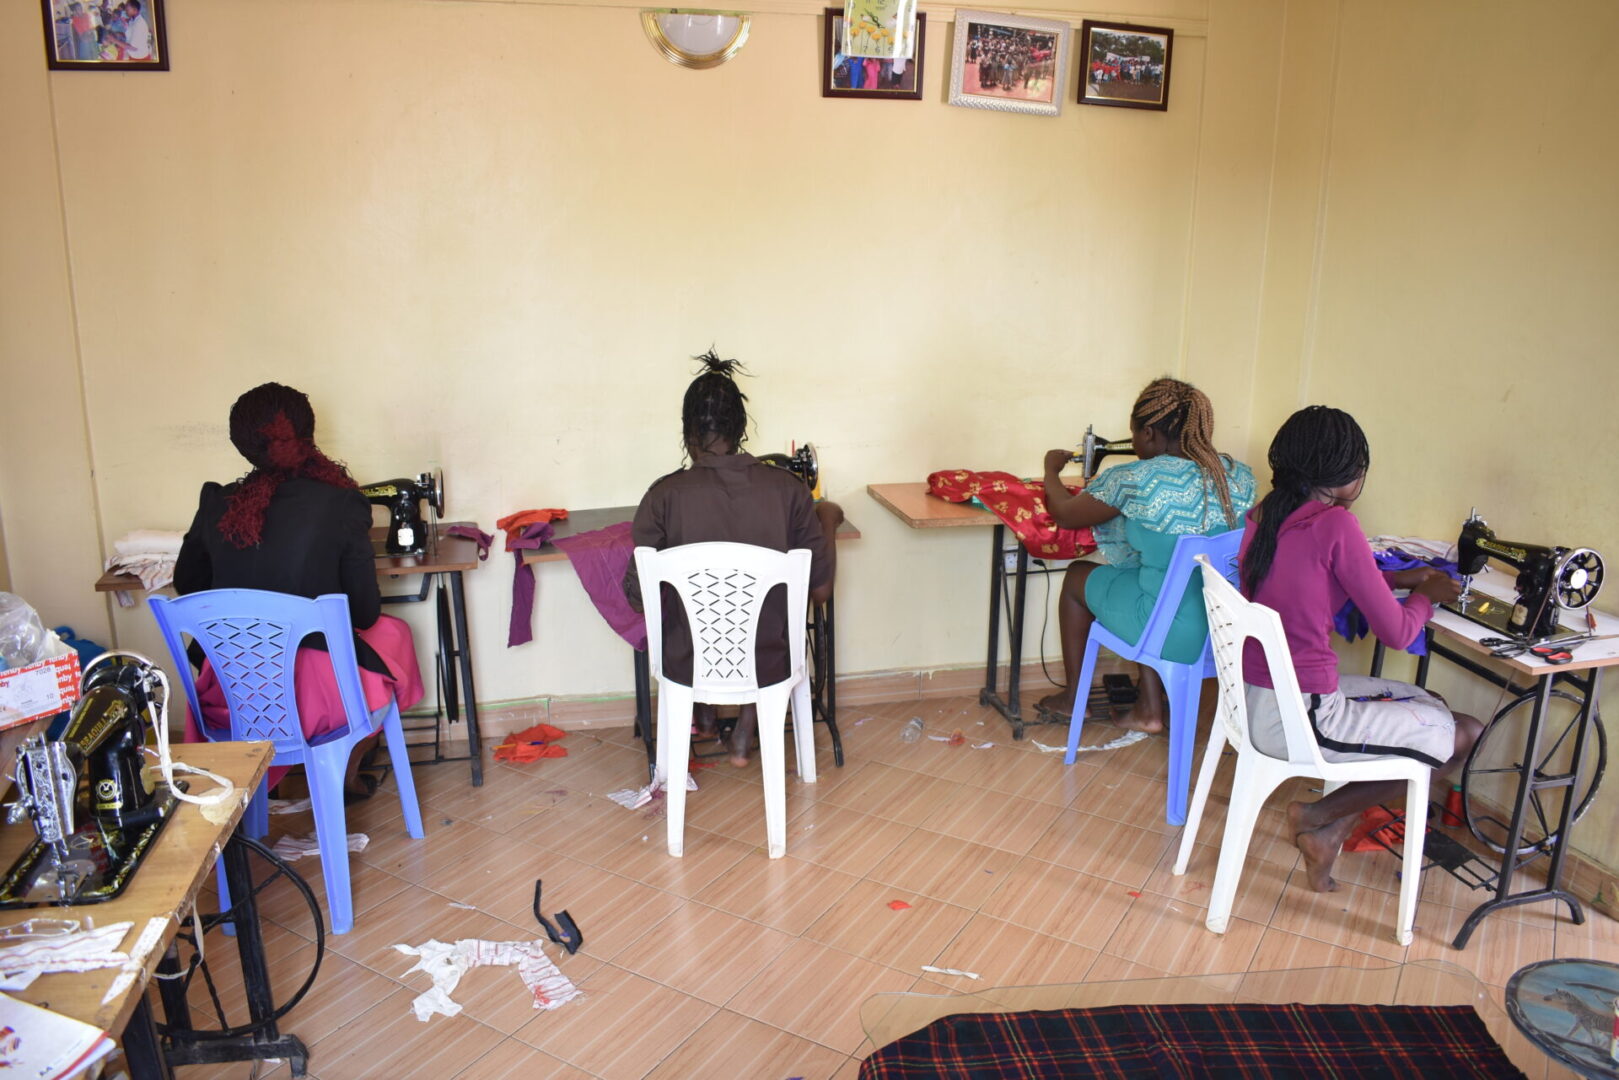 A group of people sitting around tables sewing.